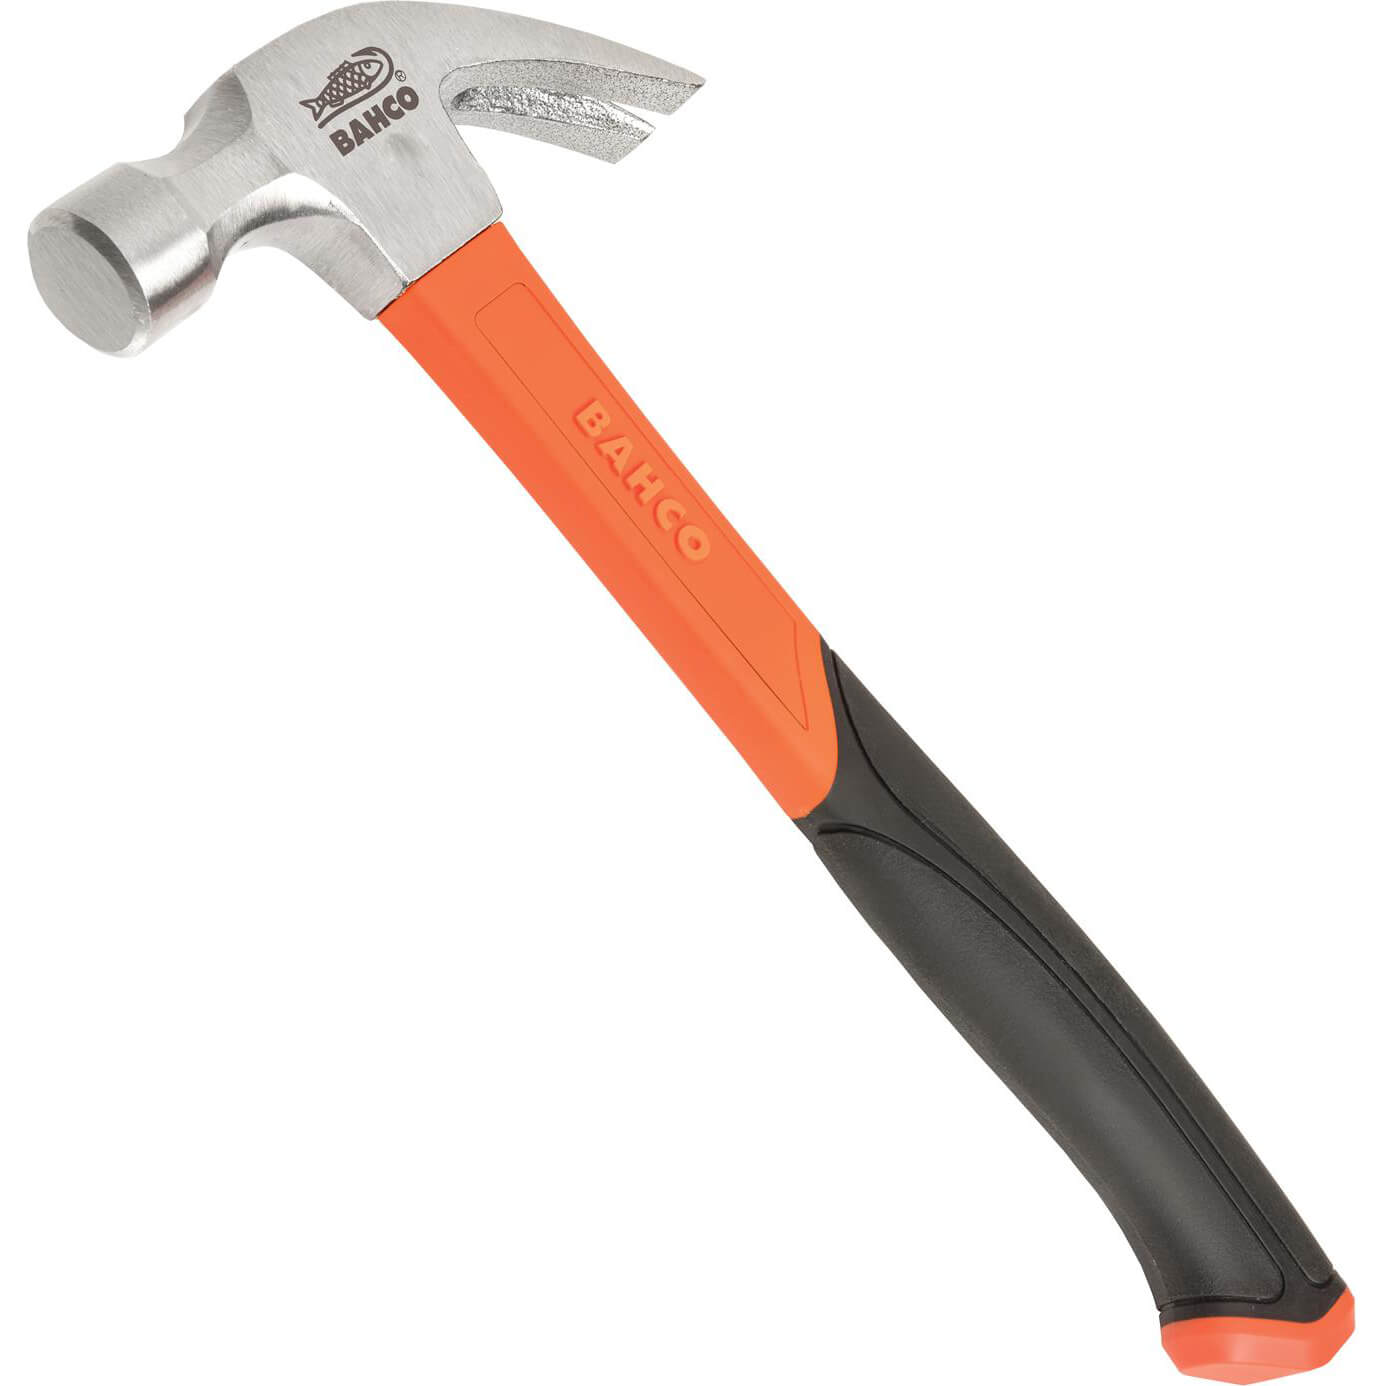 Photo of Bahco 428 Curved Fibreglass Claw Hammer 450g